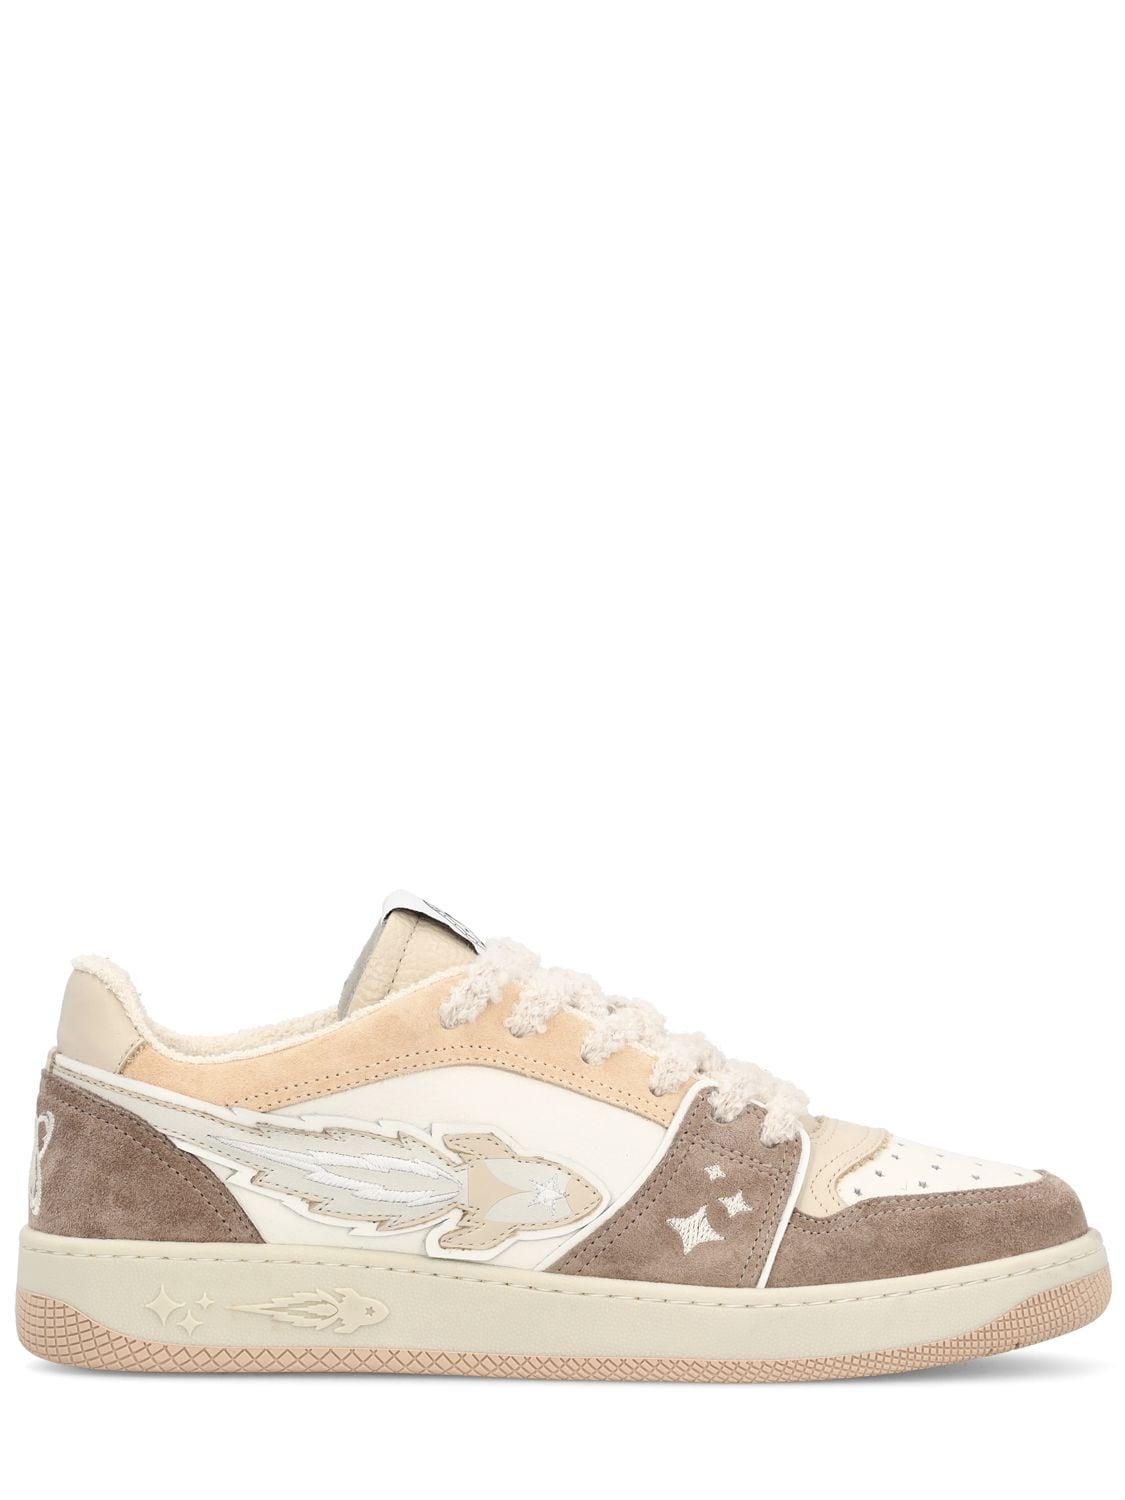 Enterprise Japan Low Logo Trainers In White,brown